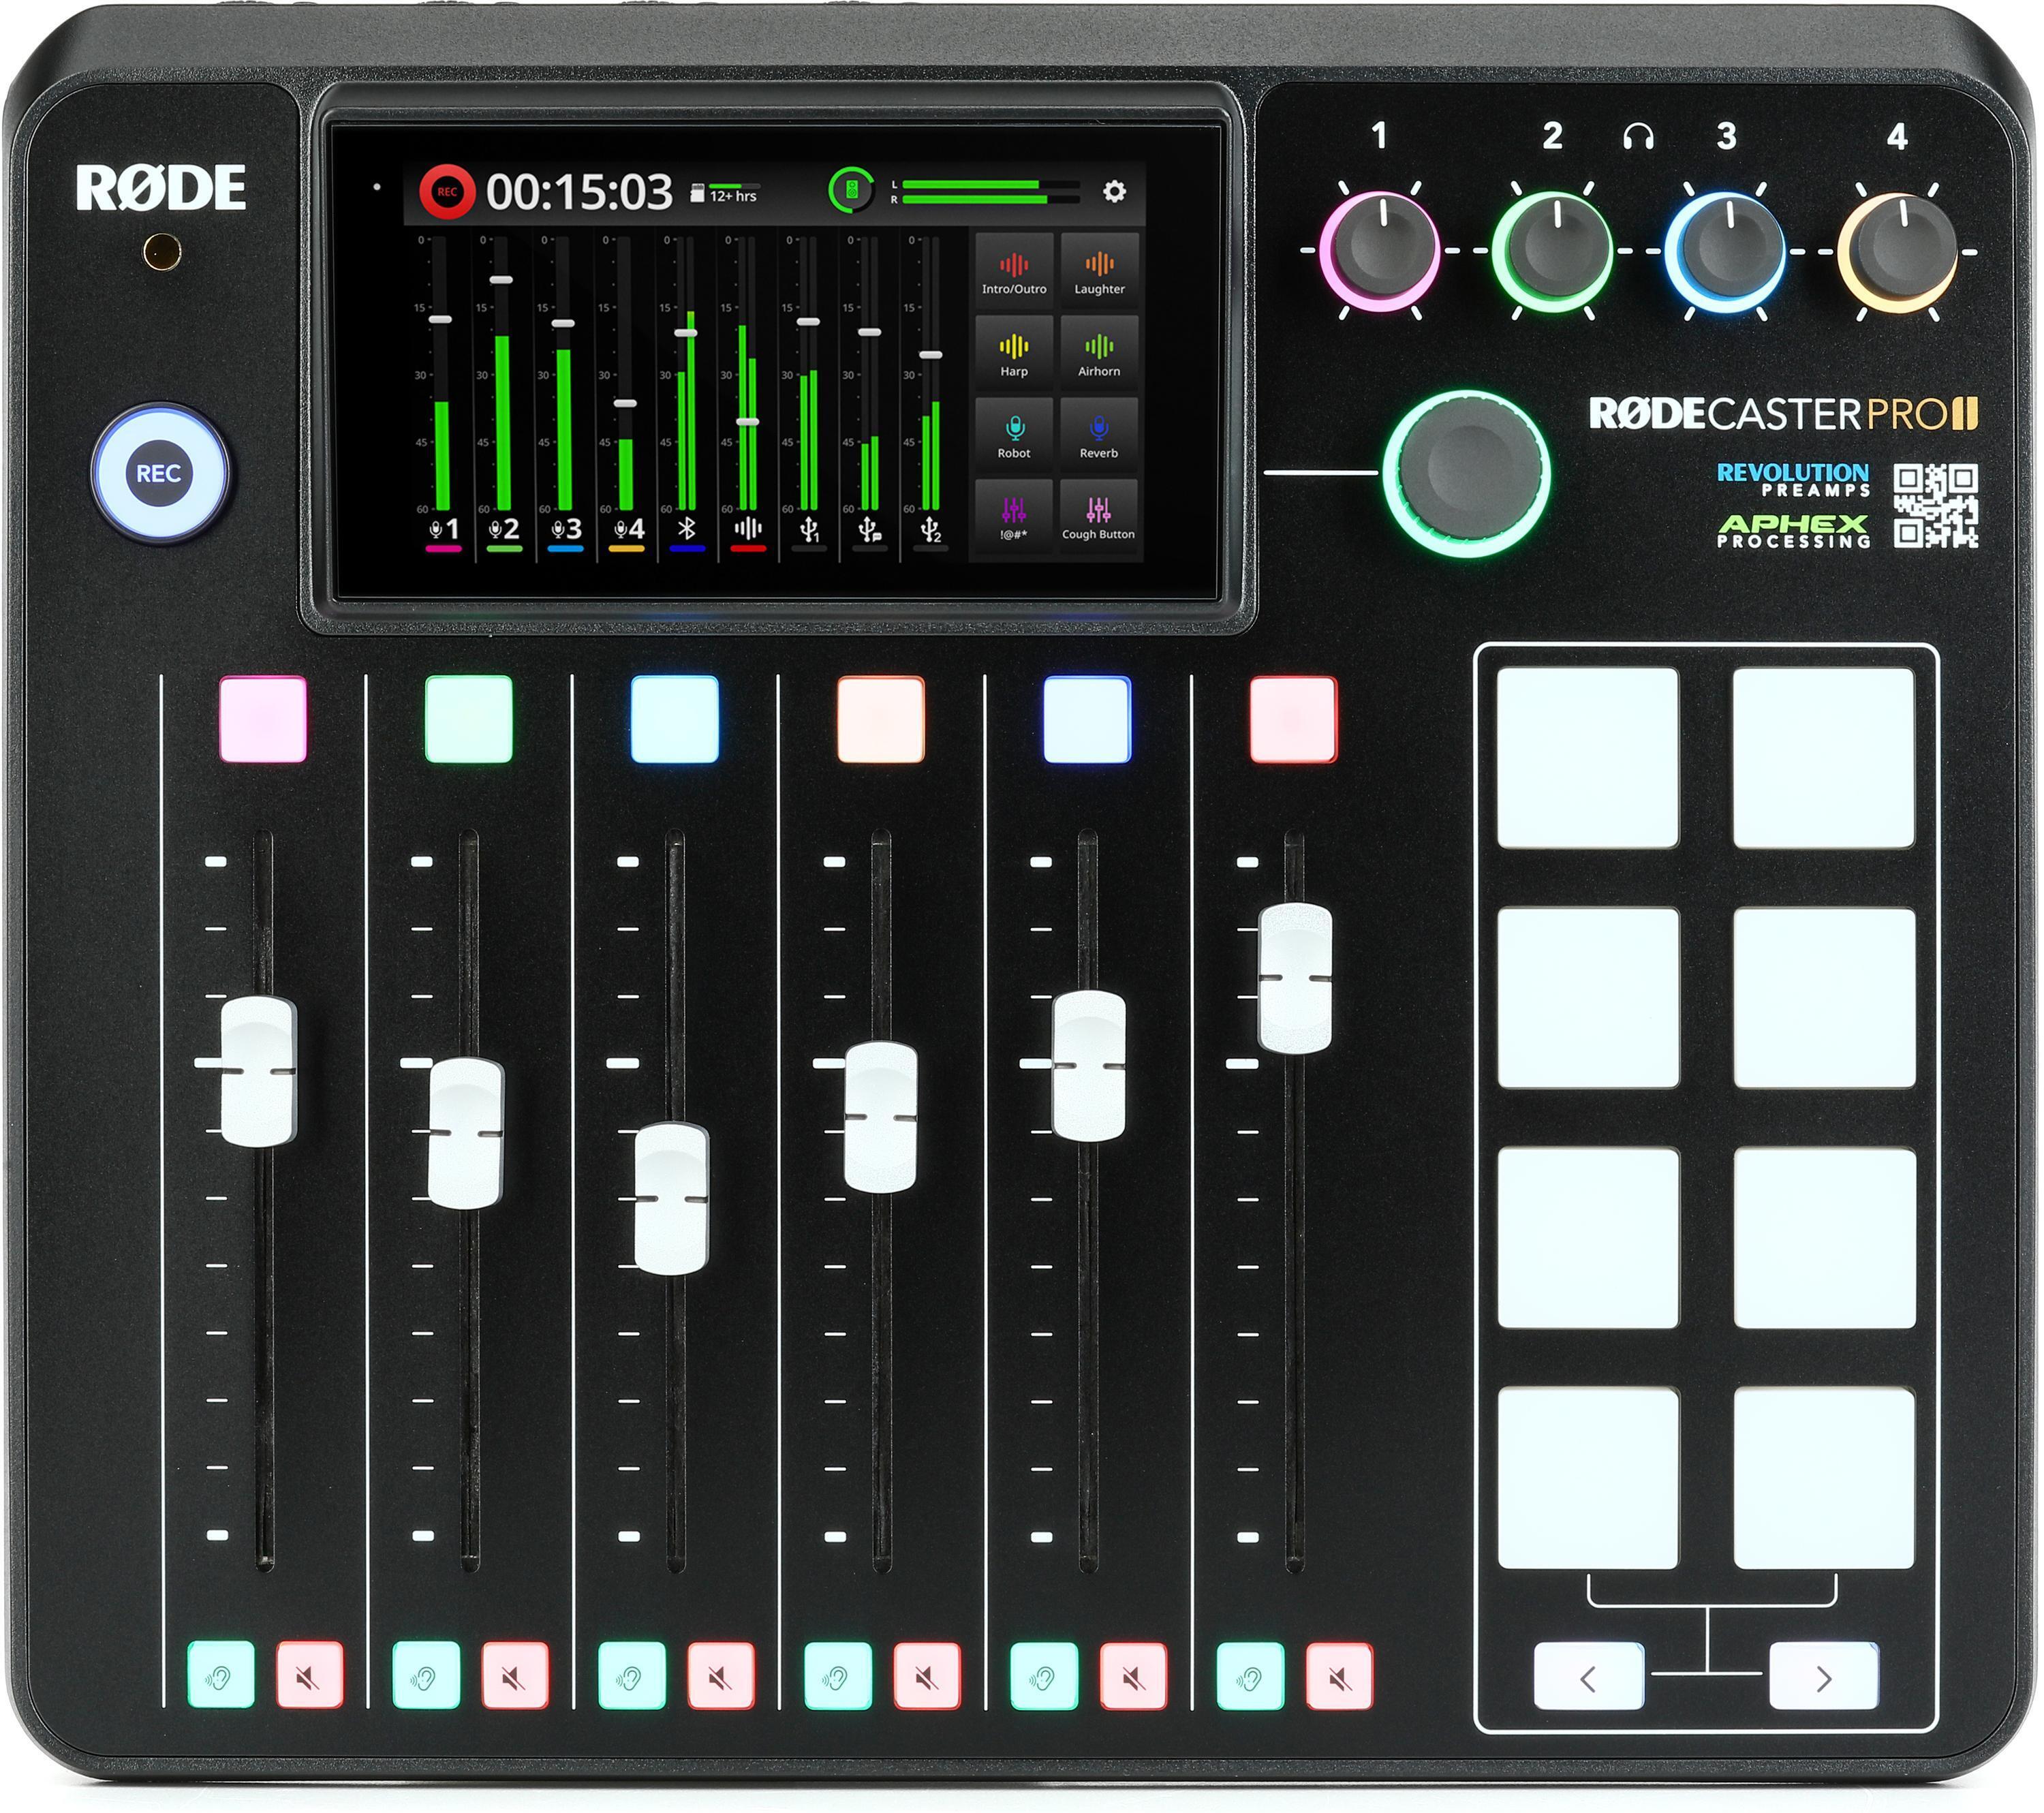 RODE RodeCaster Pro II Livestreaming Audio Mixer